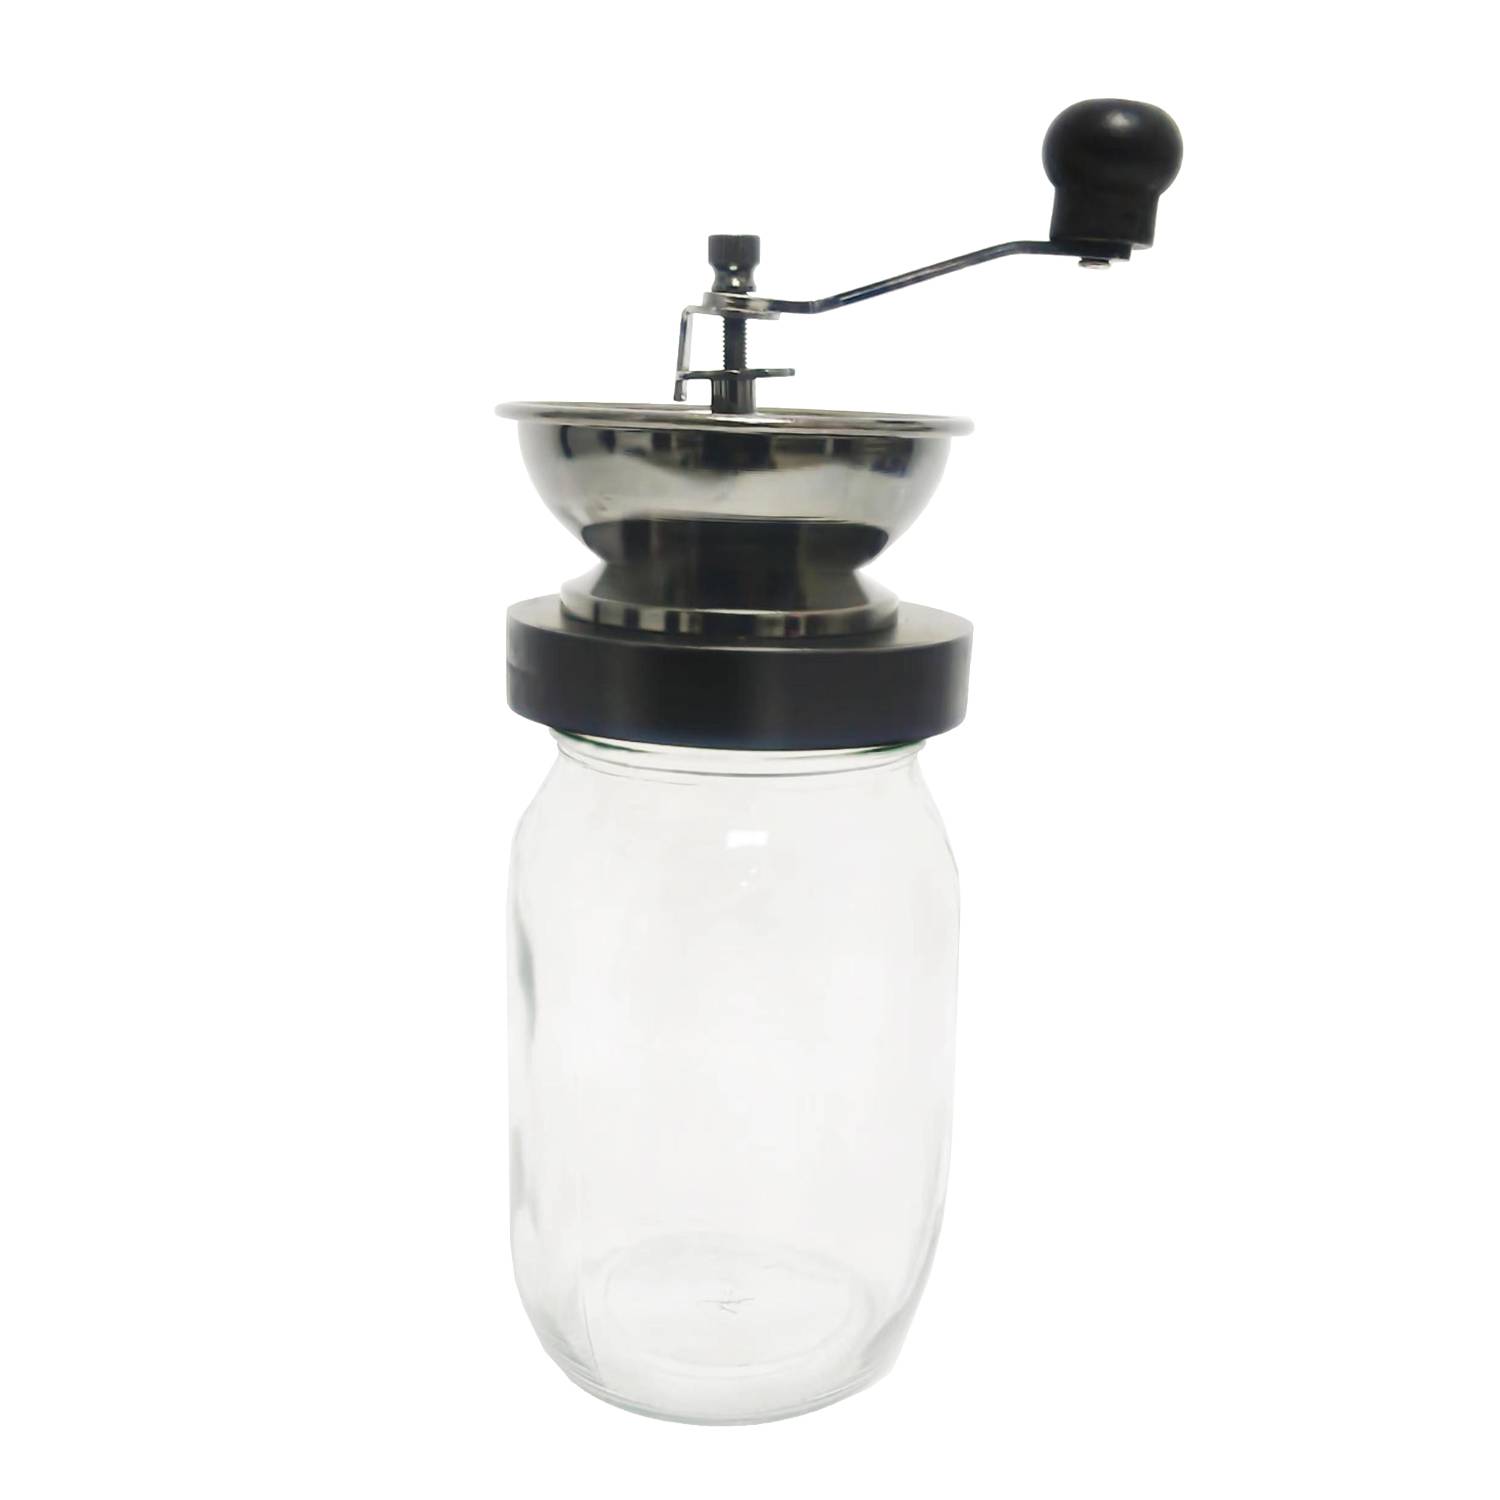 Coffee and Spice Grinder Lid for Mason Jars Regular Mouth